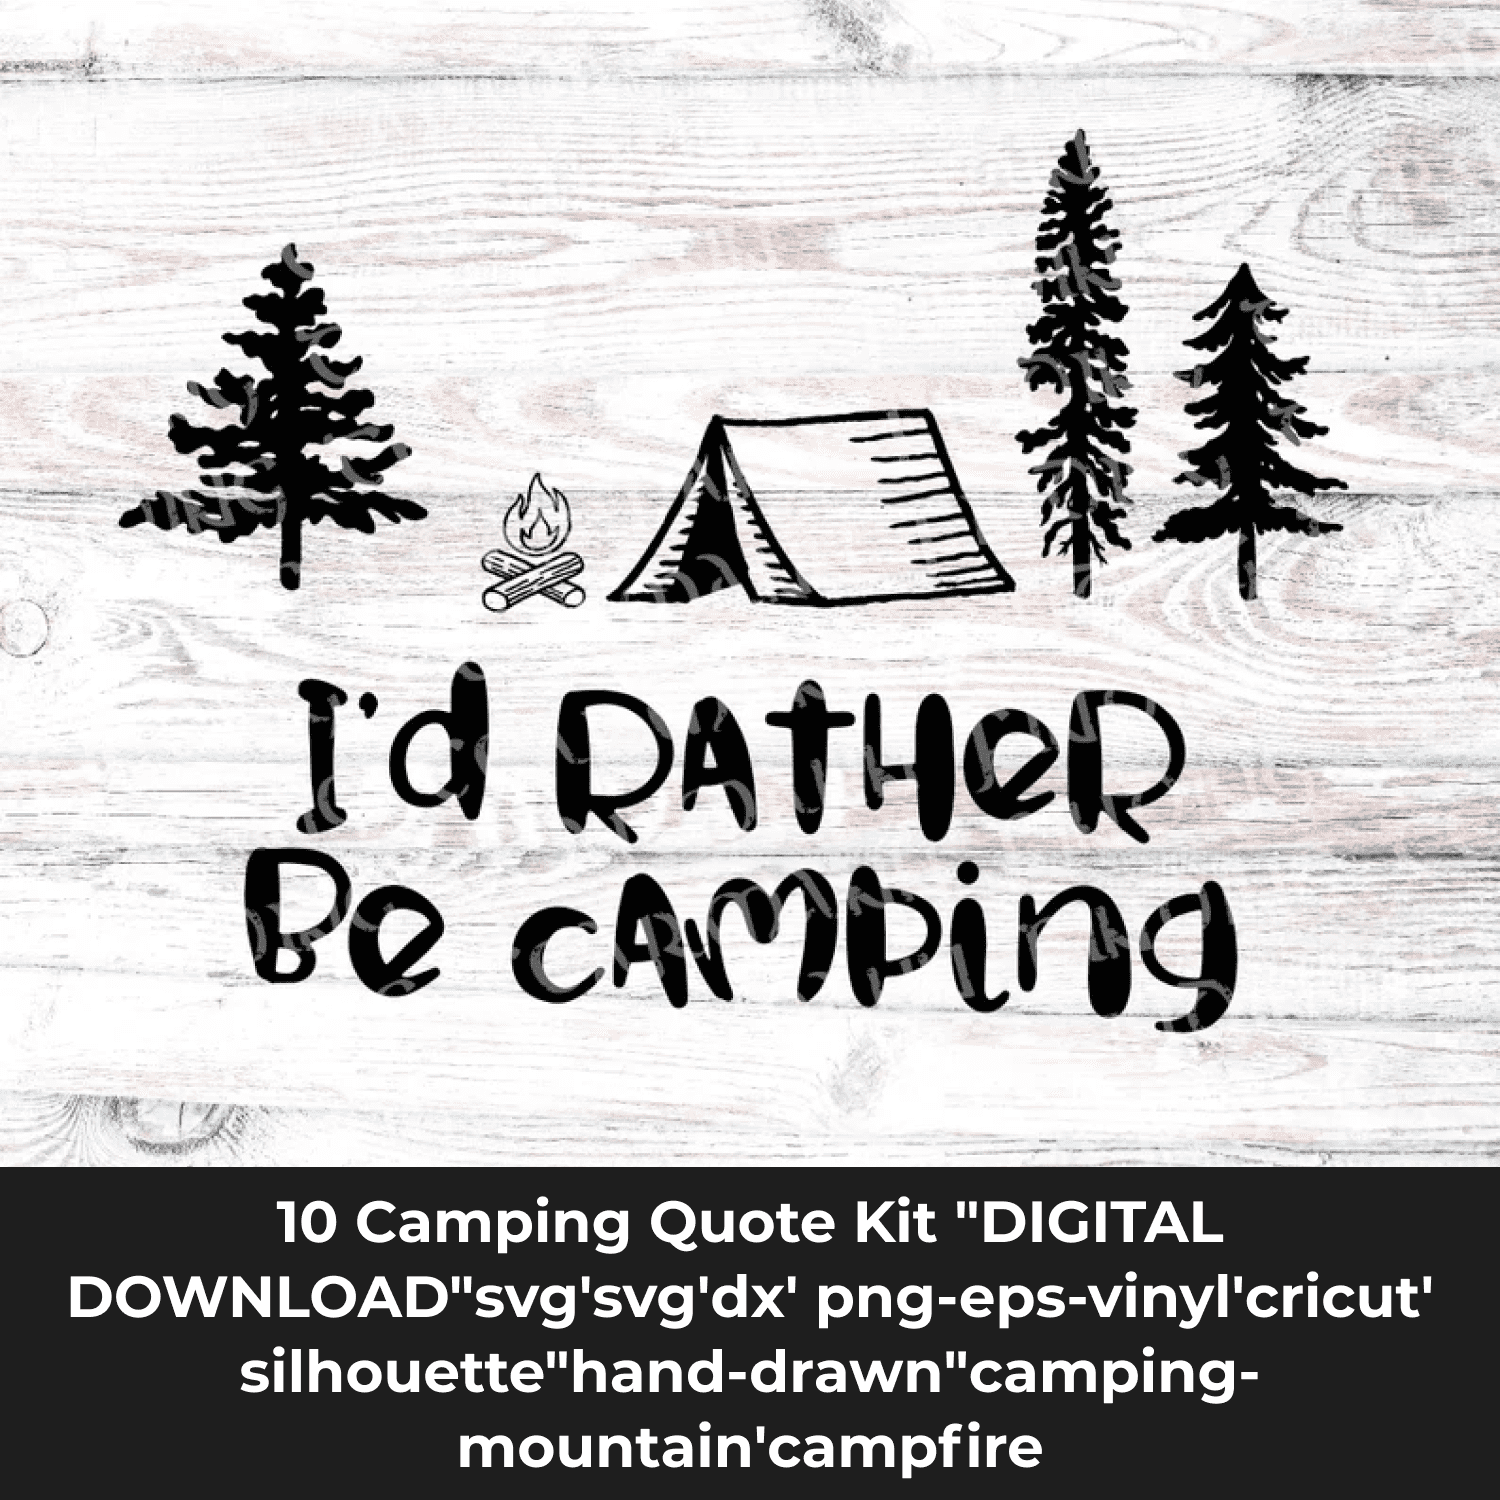 10 Camping Quote Bundle cover.